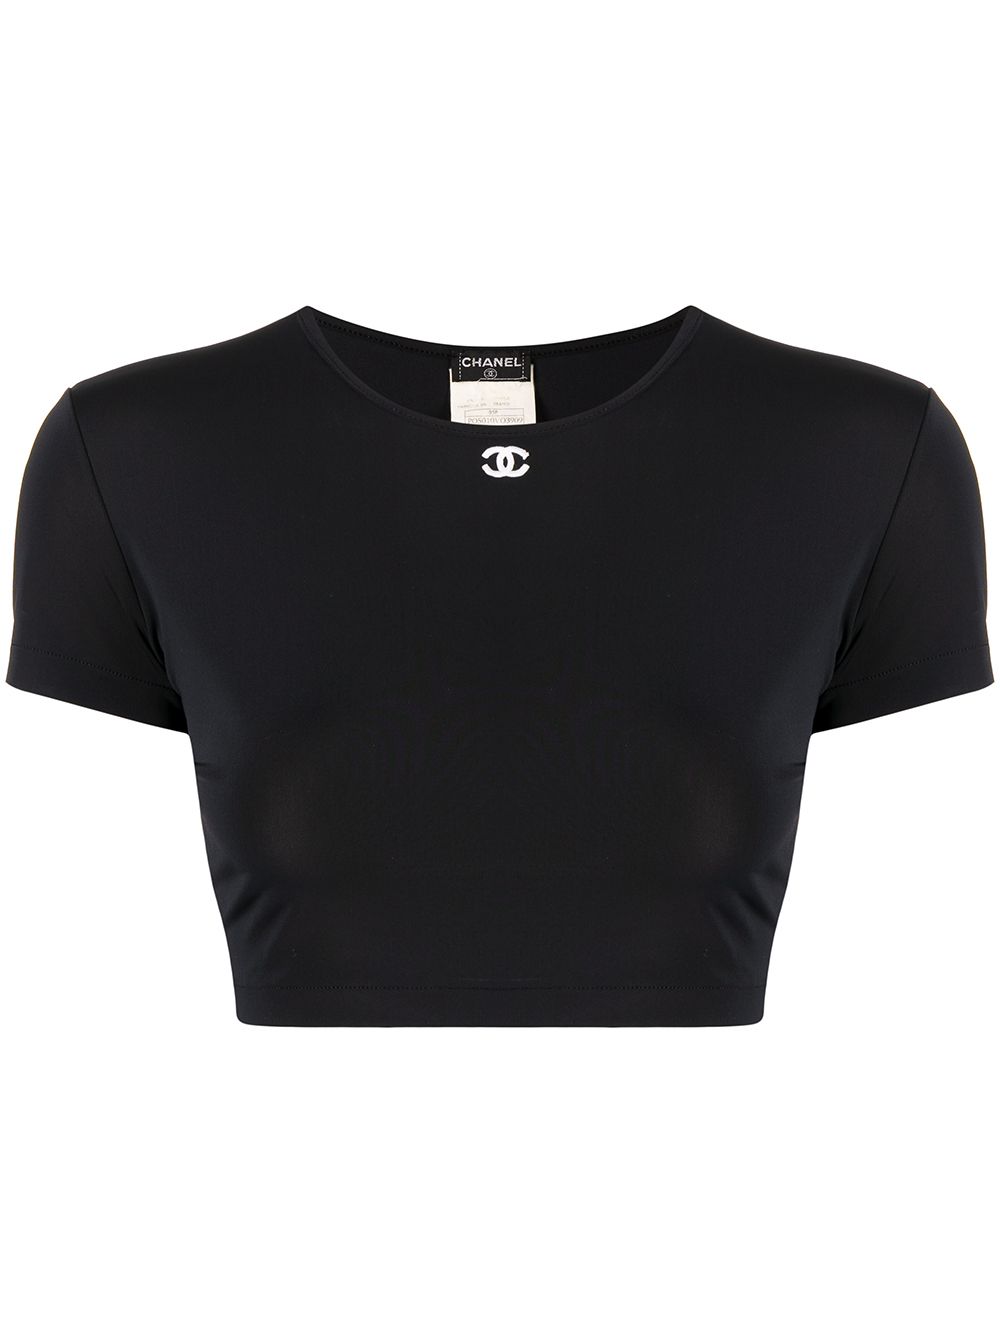 CHANEL Pre-Owned 1995 logo cropped T-shirt - Black von CHANEL Pre-Owned